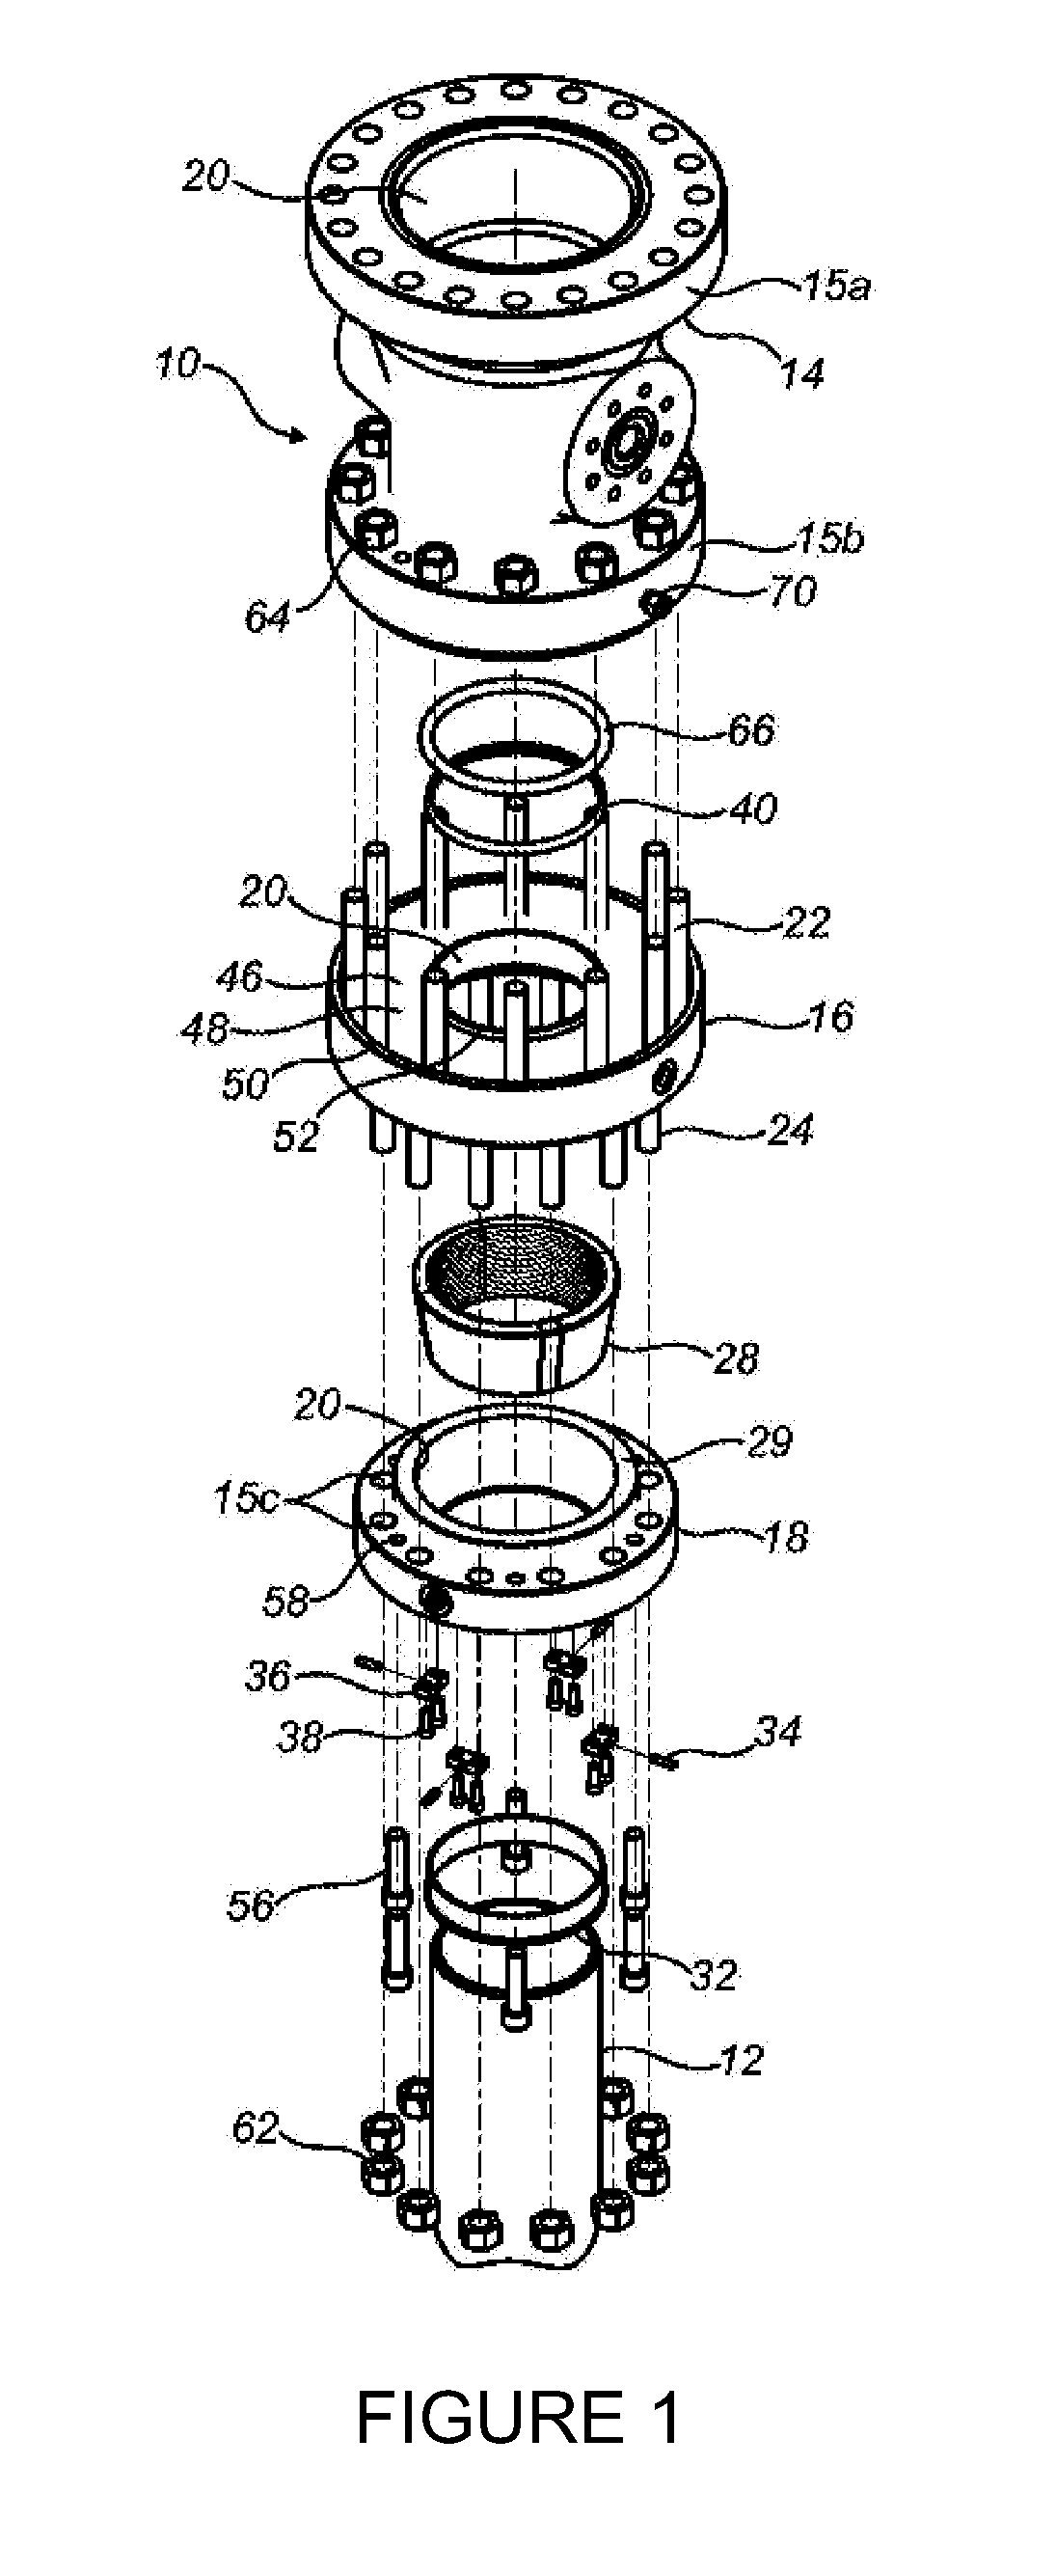 Casing head slip lock connection for high temperature service